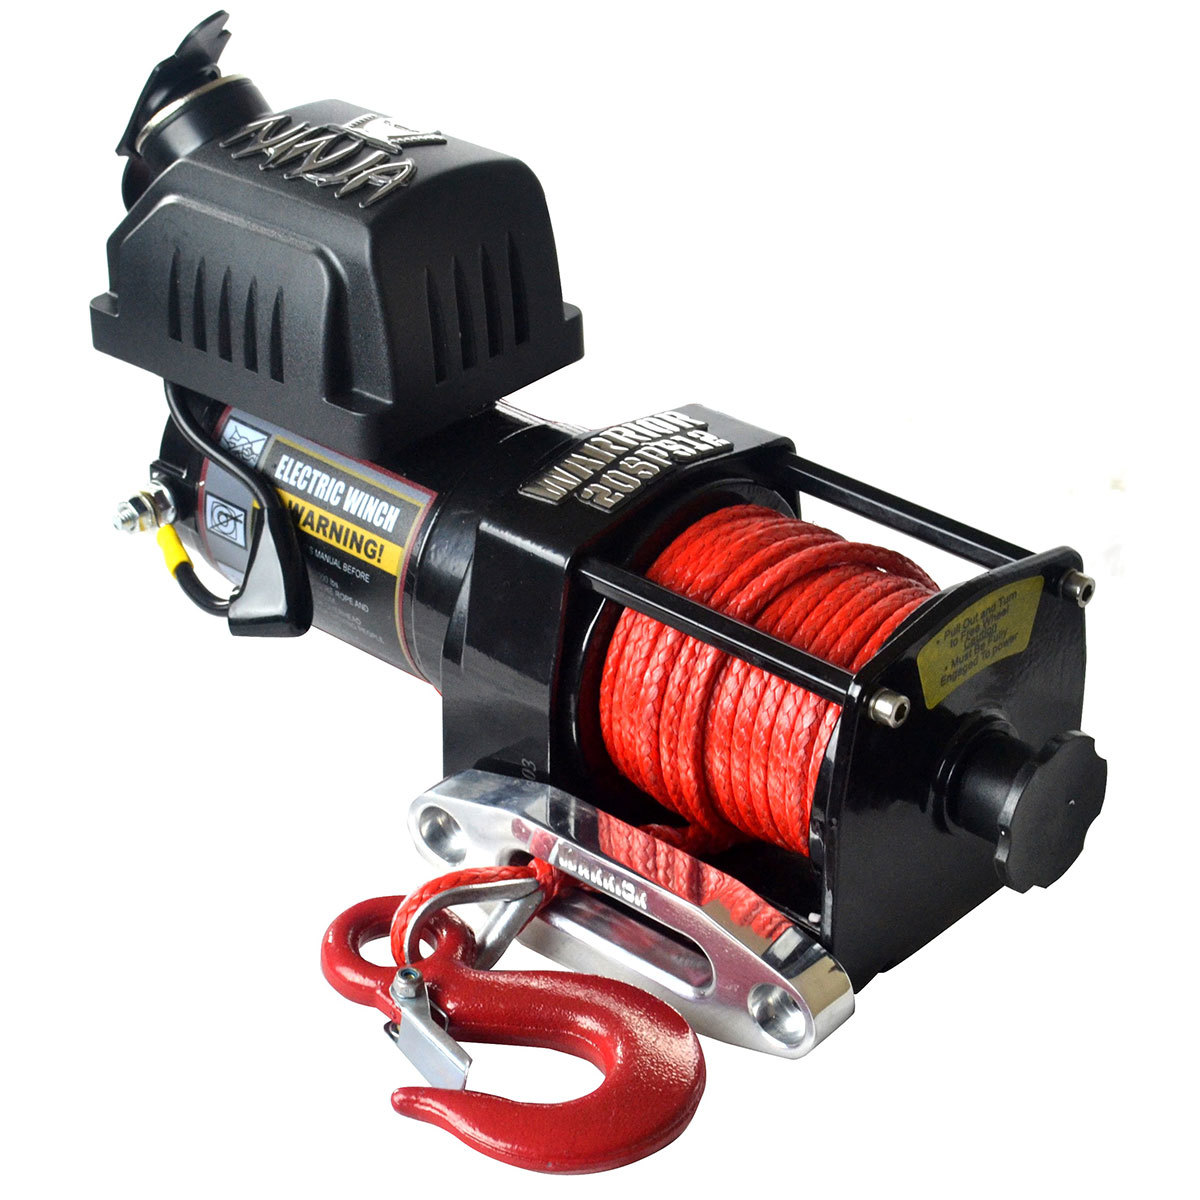 Warrior Ninja 2000 Synthetic Rope Electric Winch - Model 20SPA12